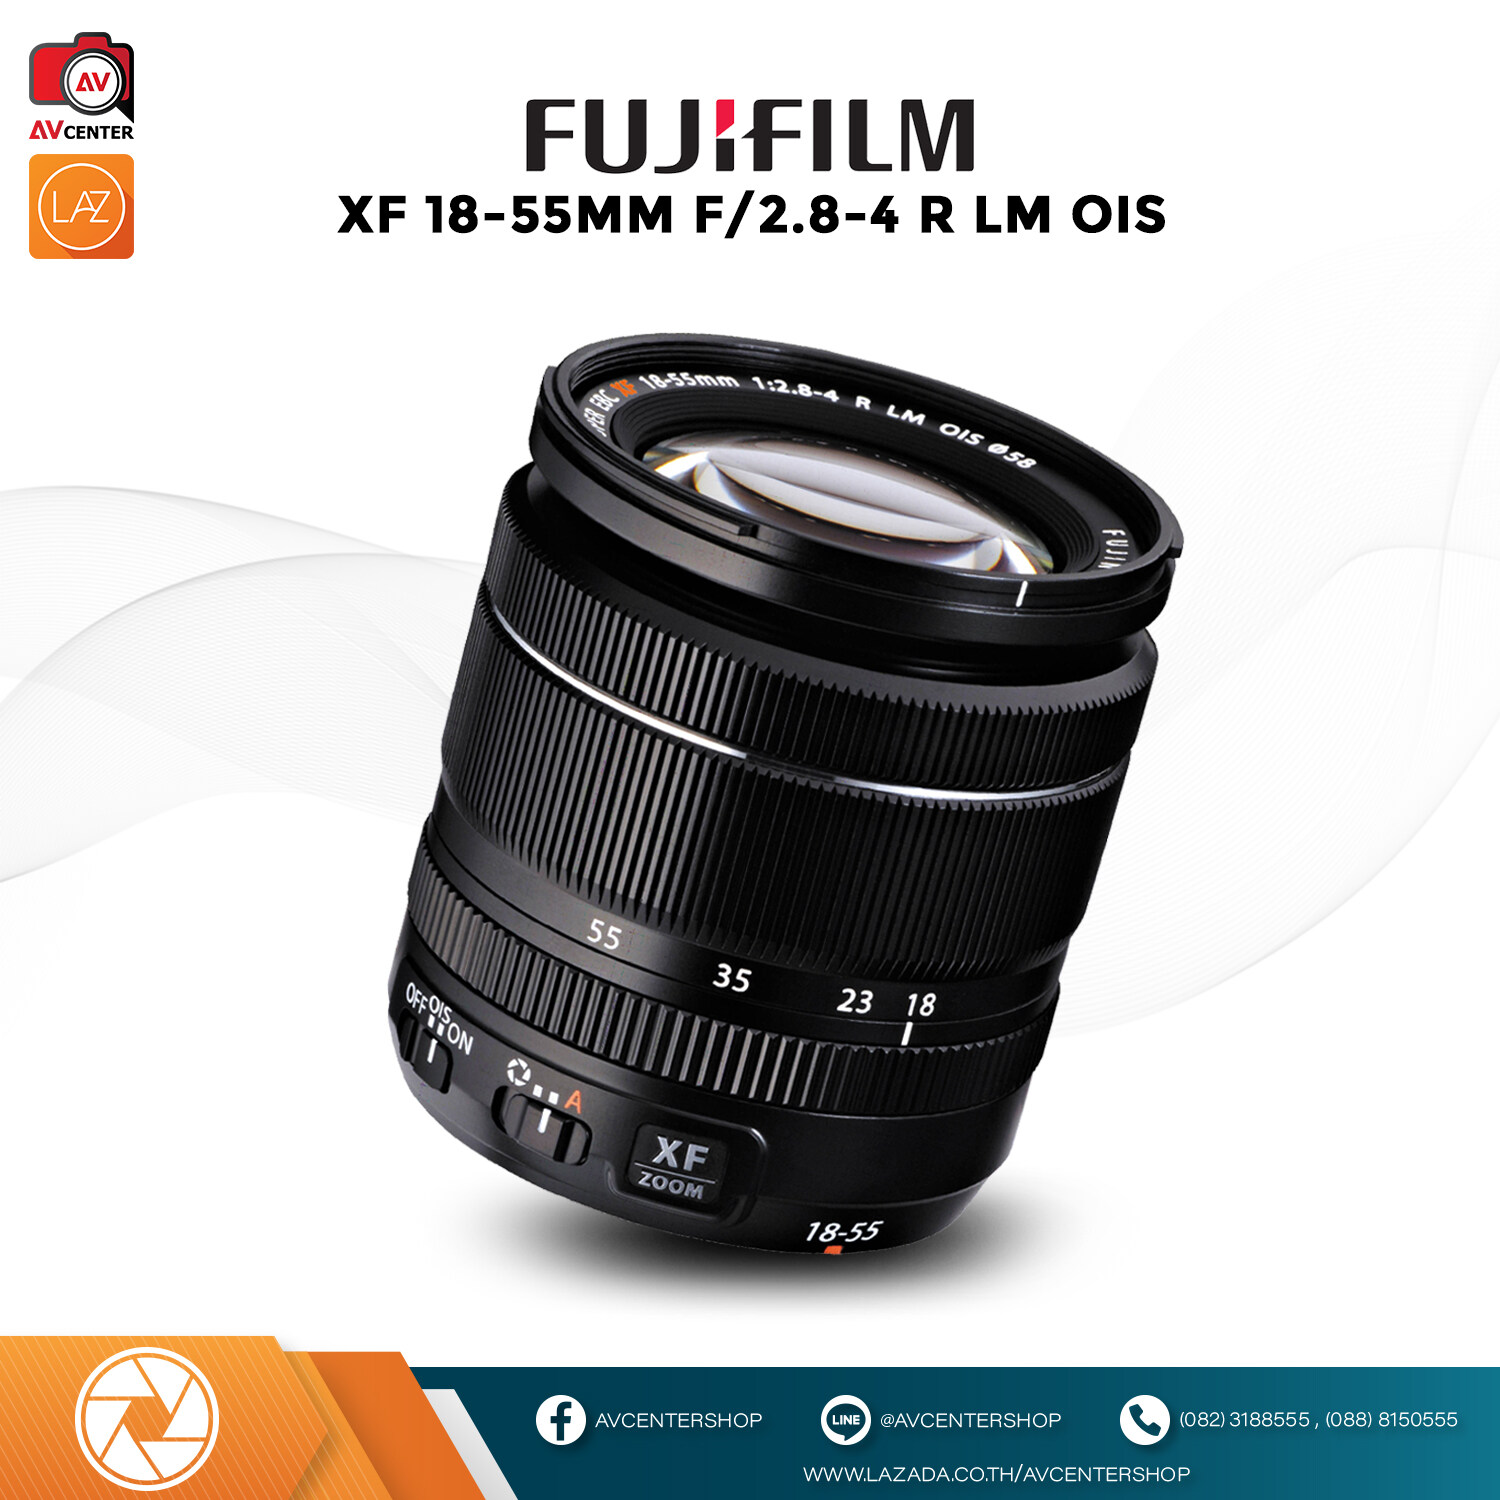 Fujifilm Lens XF 18-55 mm. F2.8-4 R LM OIS [รับประกัน 1 ปี by AVcentershop]